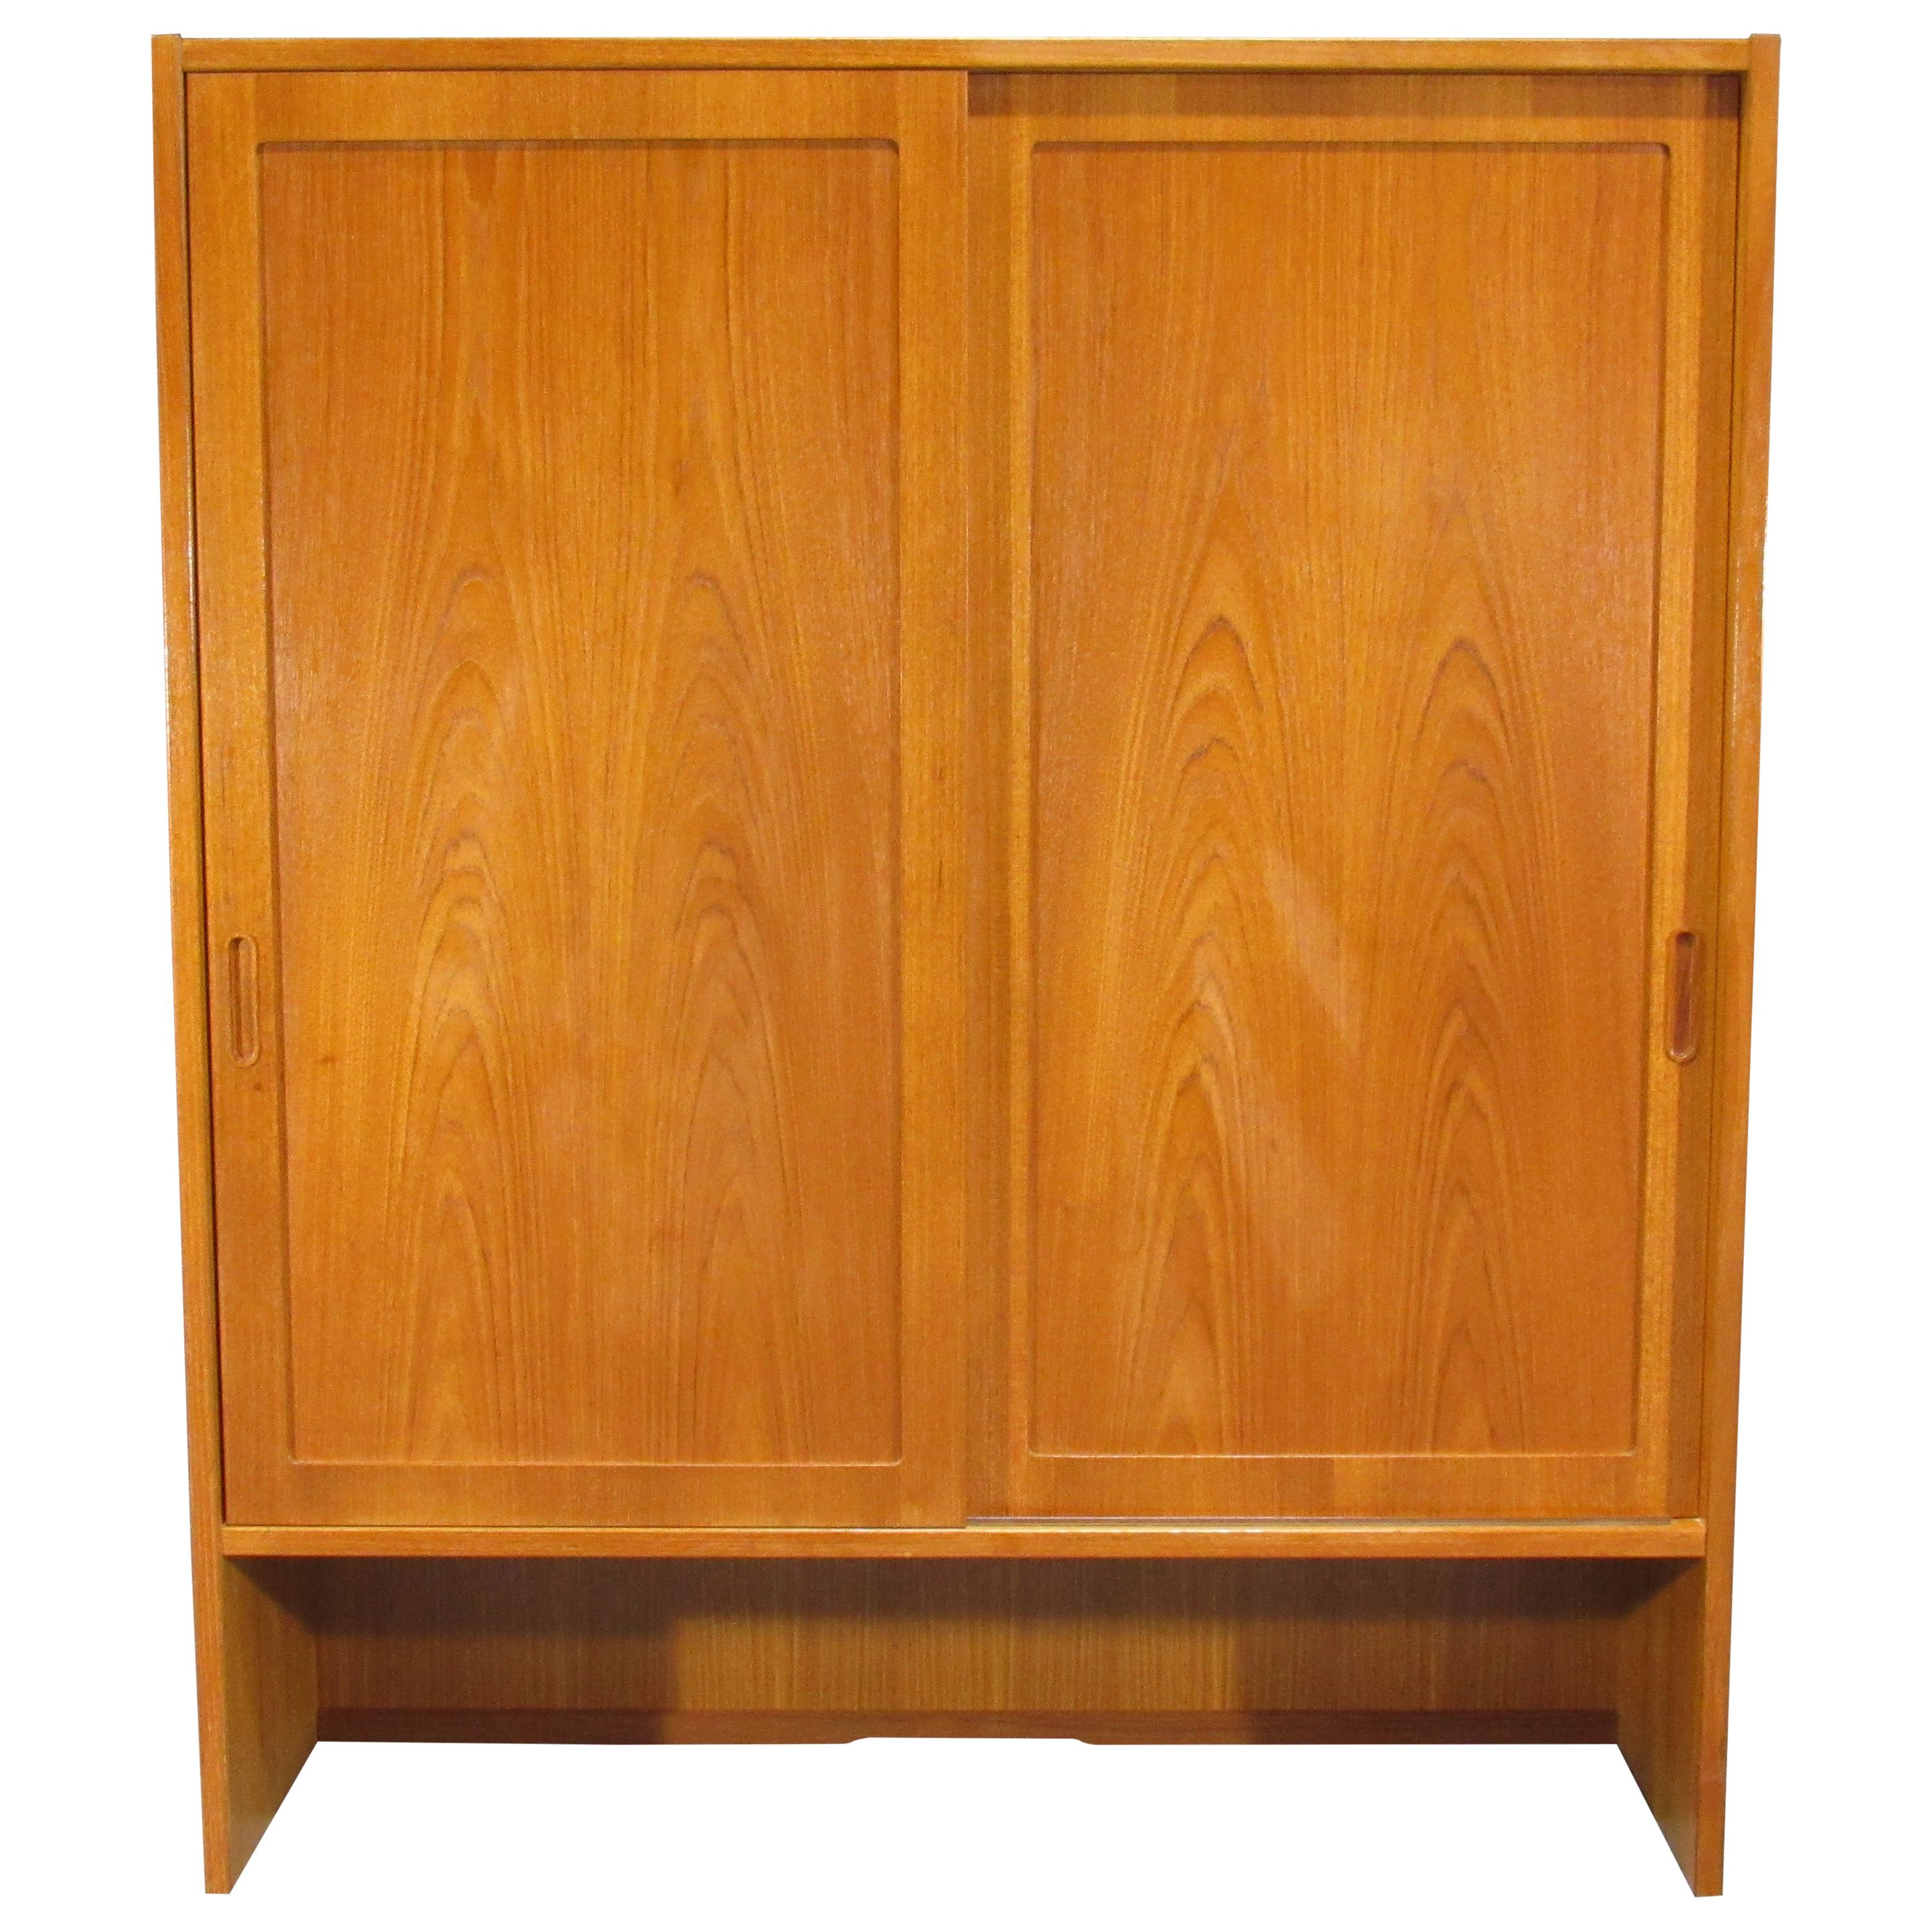 Pair of Midcentury, Danish Modern Teak Cabinets by Poul Hundevad for HU